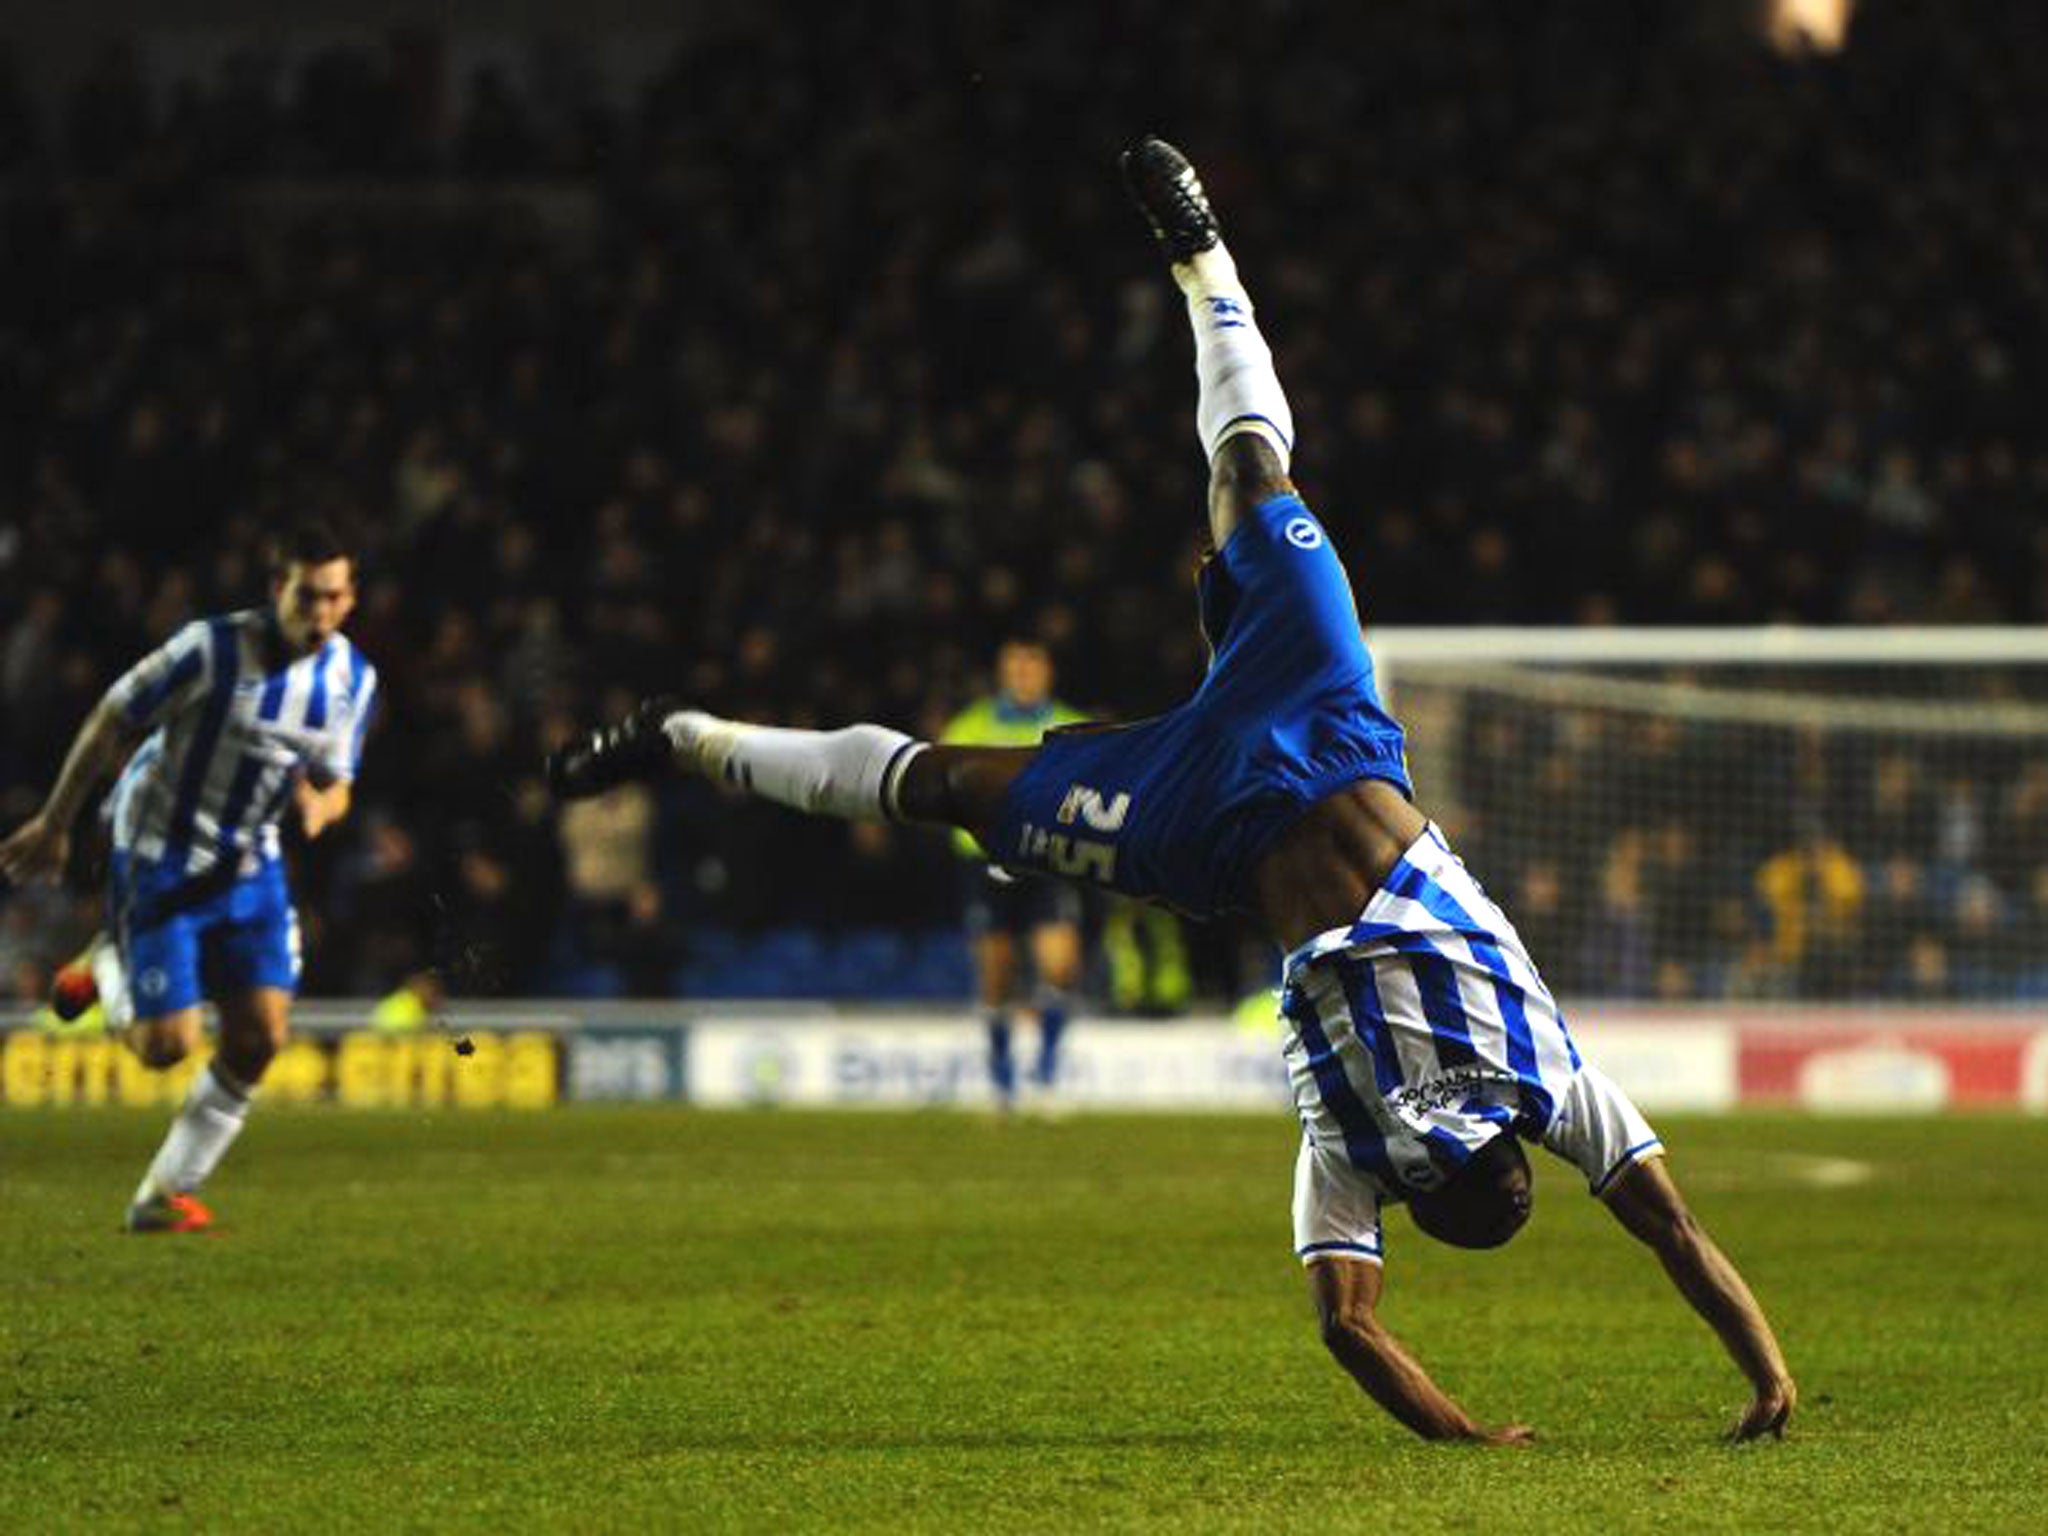 Kazenga LuaLua’s goal celebrations have been banned by the club doctor